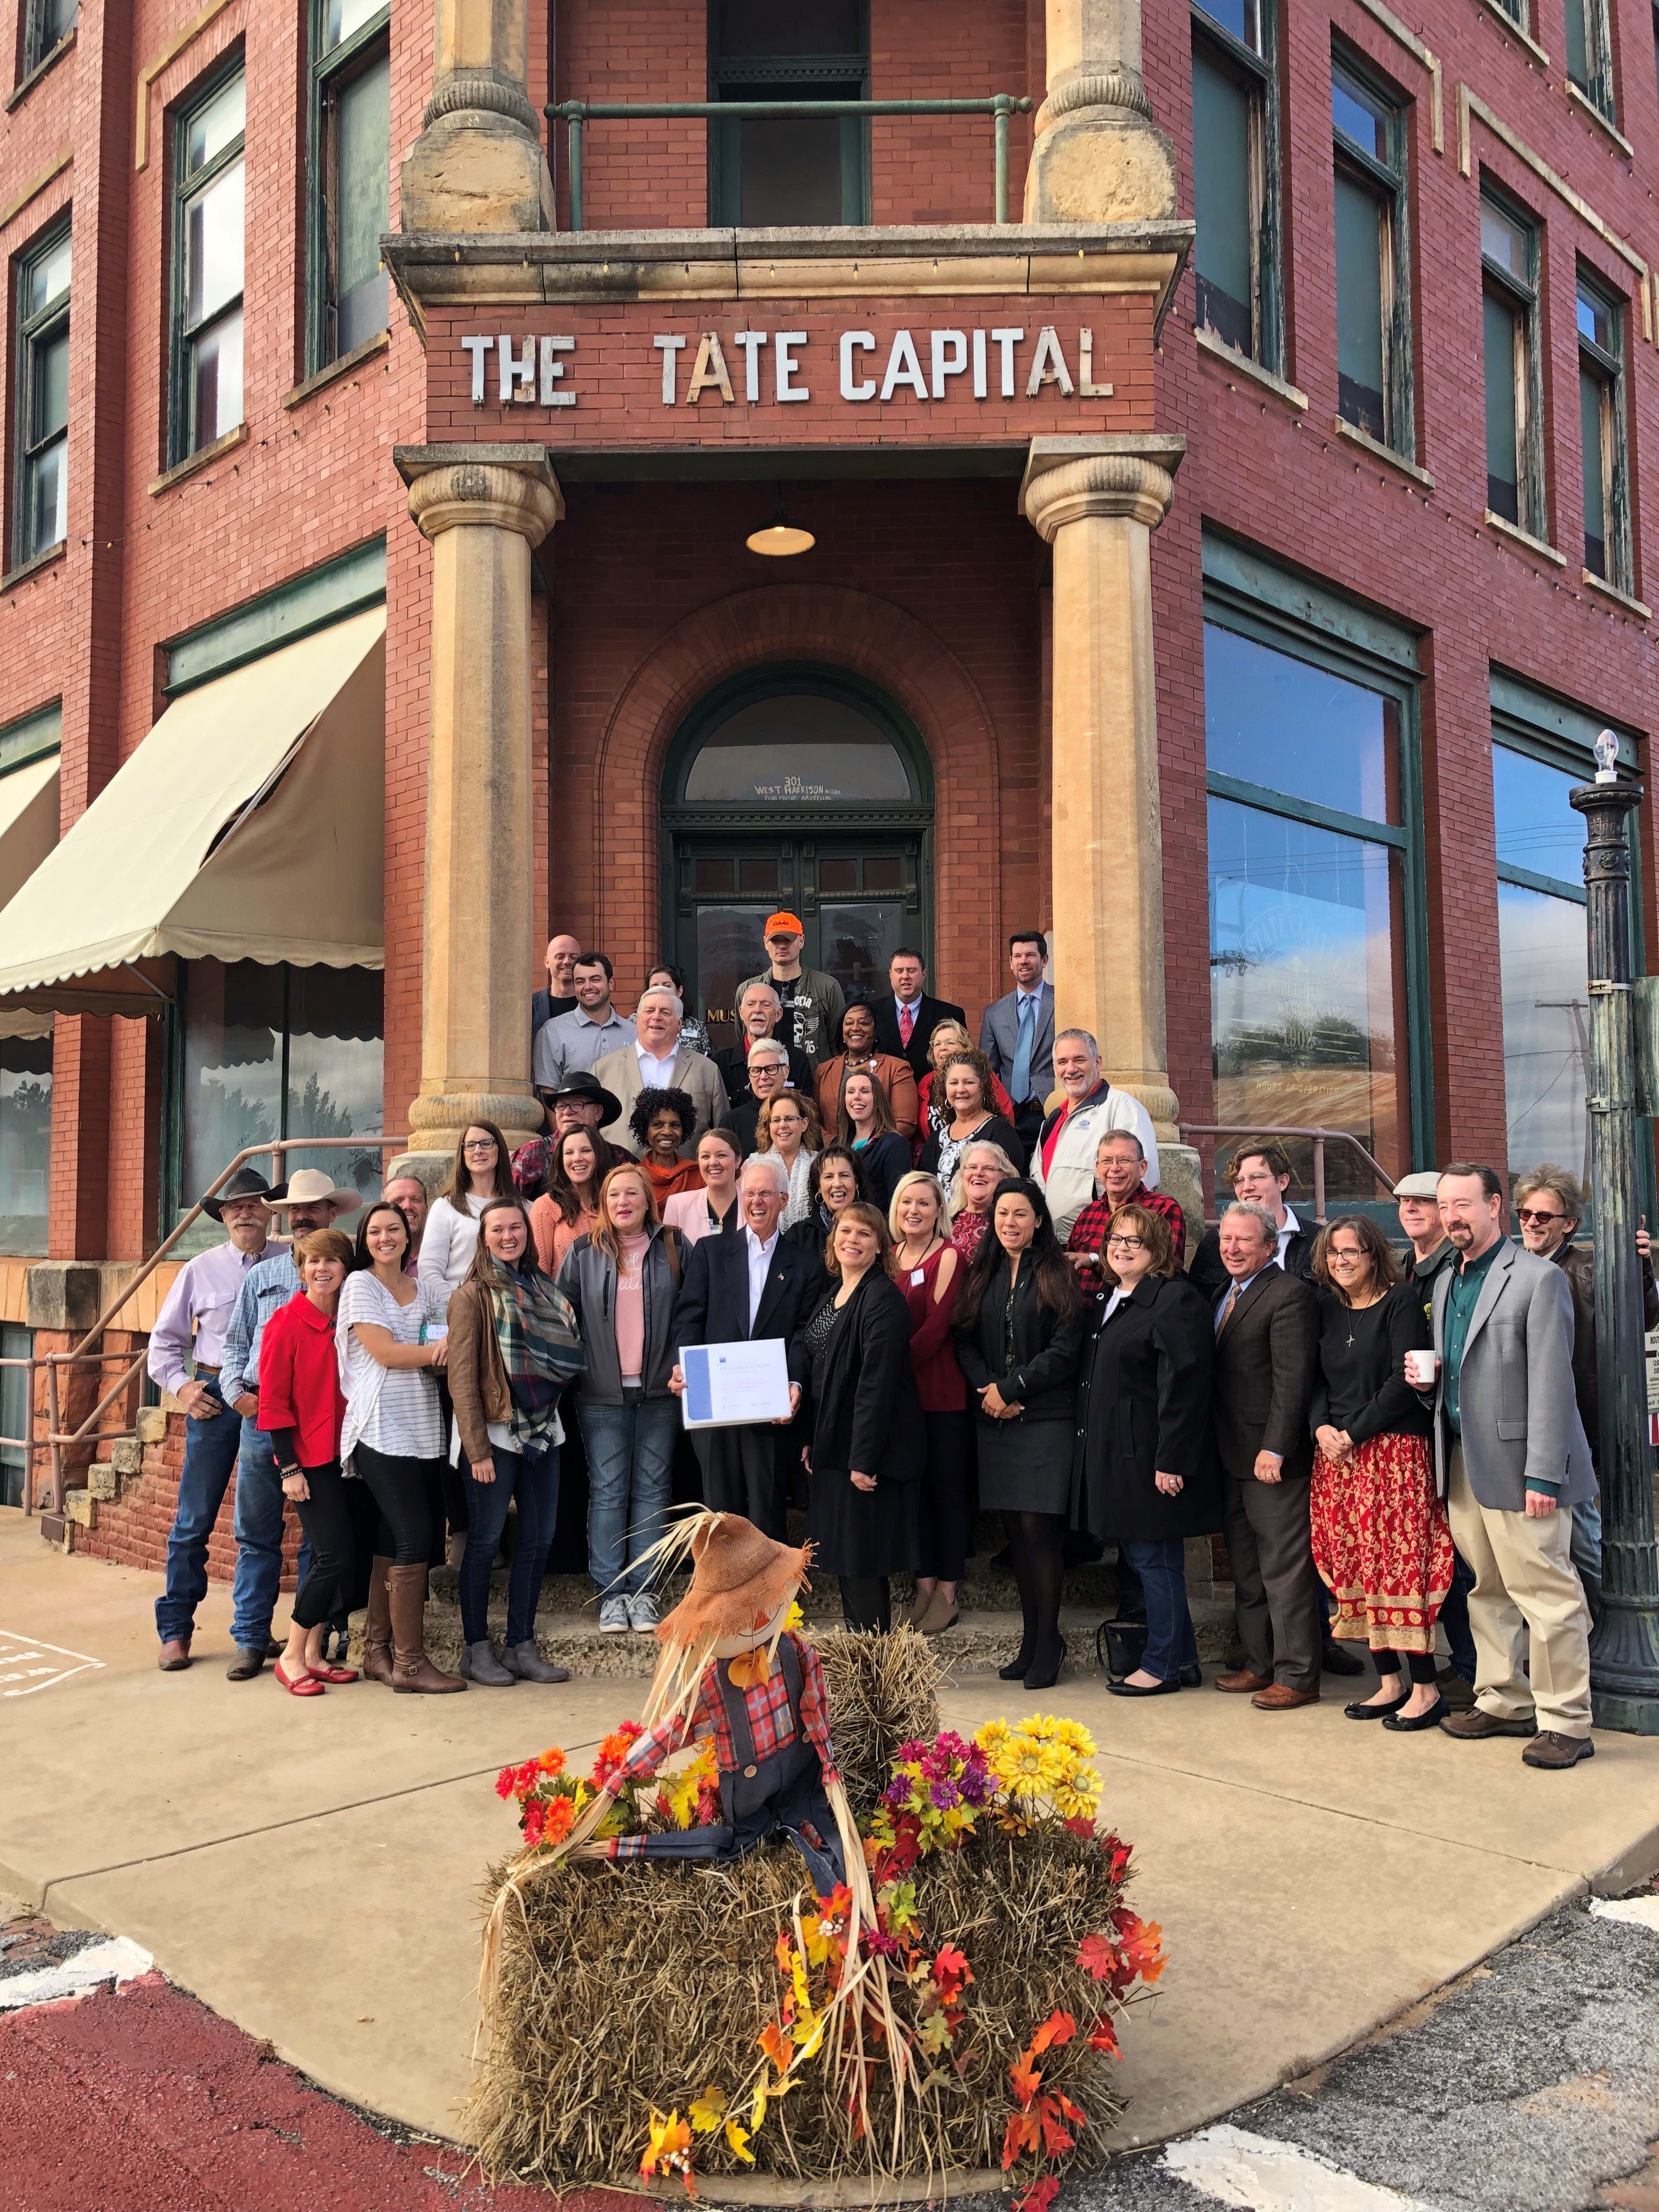 Proud Guthrie citizens and stakeholders gather on the steps of the Publisher's Museum in Guthrie, Oklahoma, to commemorate being named a Great Place in America by the American Planning Association. Pictured on the far right is Mark Sweeney, ACOG Executive Director. 